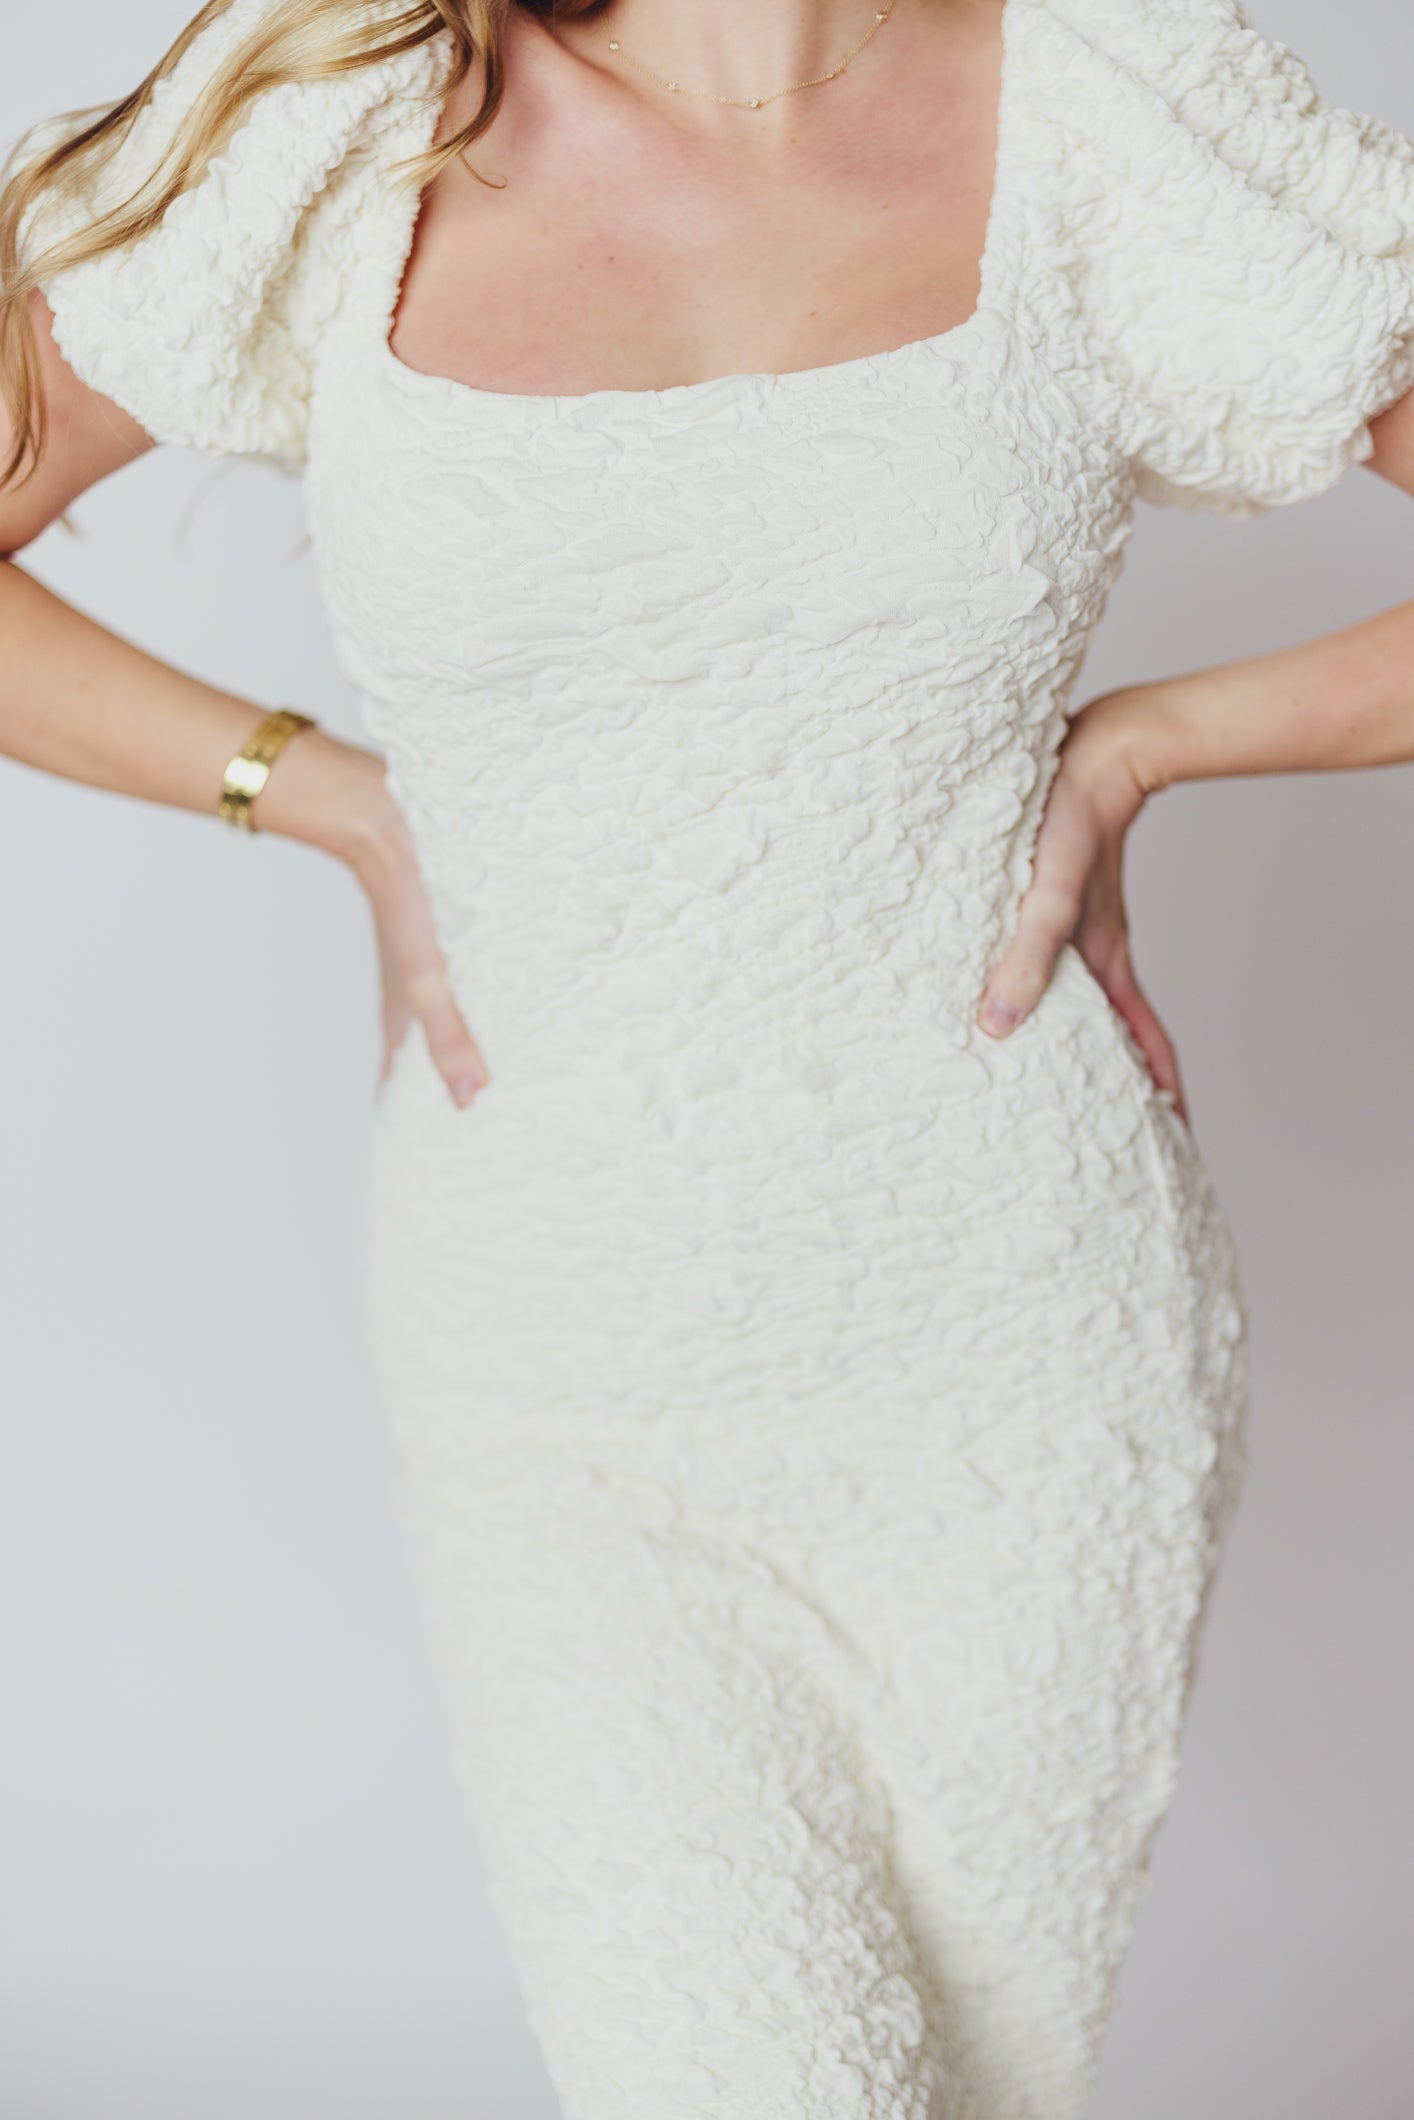 Blakeley Textured Midi Dress in Ivory - Bump Friendly & Inclusive Sizing (S-3XL) - Pre-Order 5/15 $20 OFF